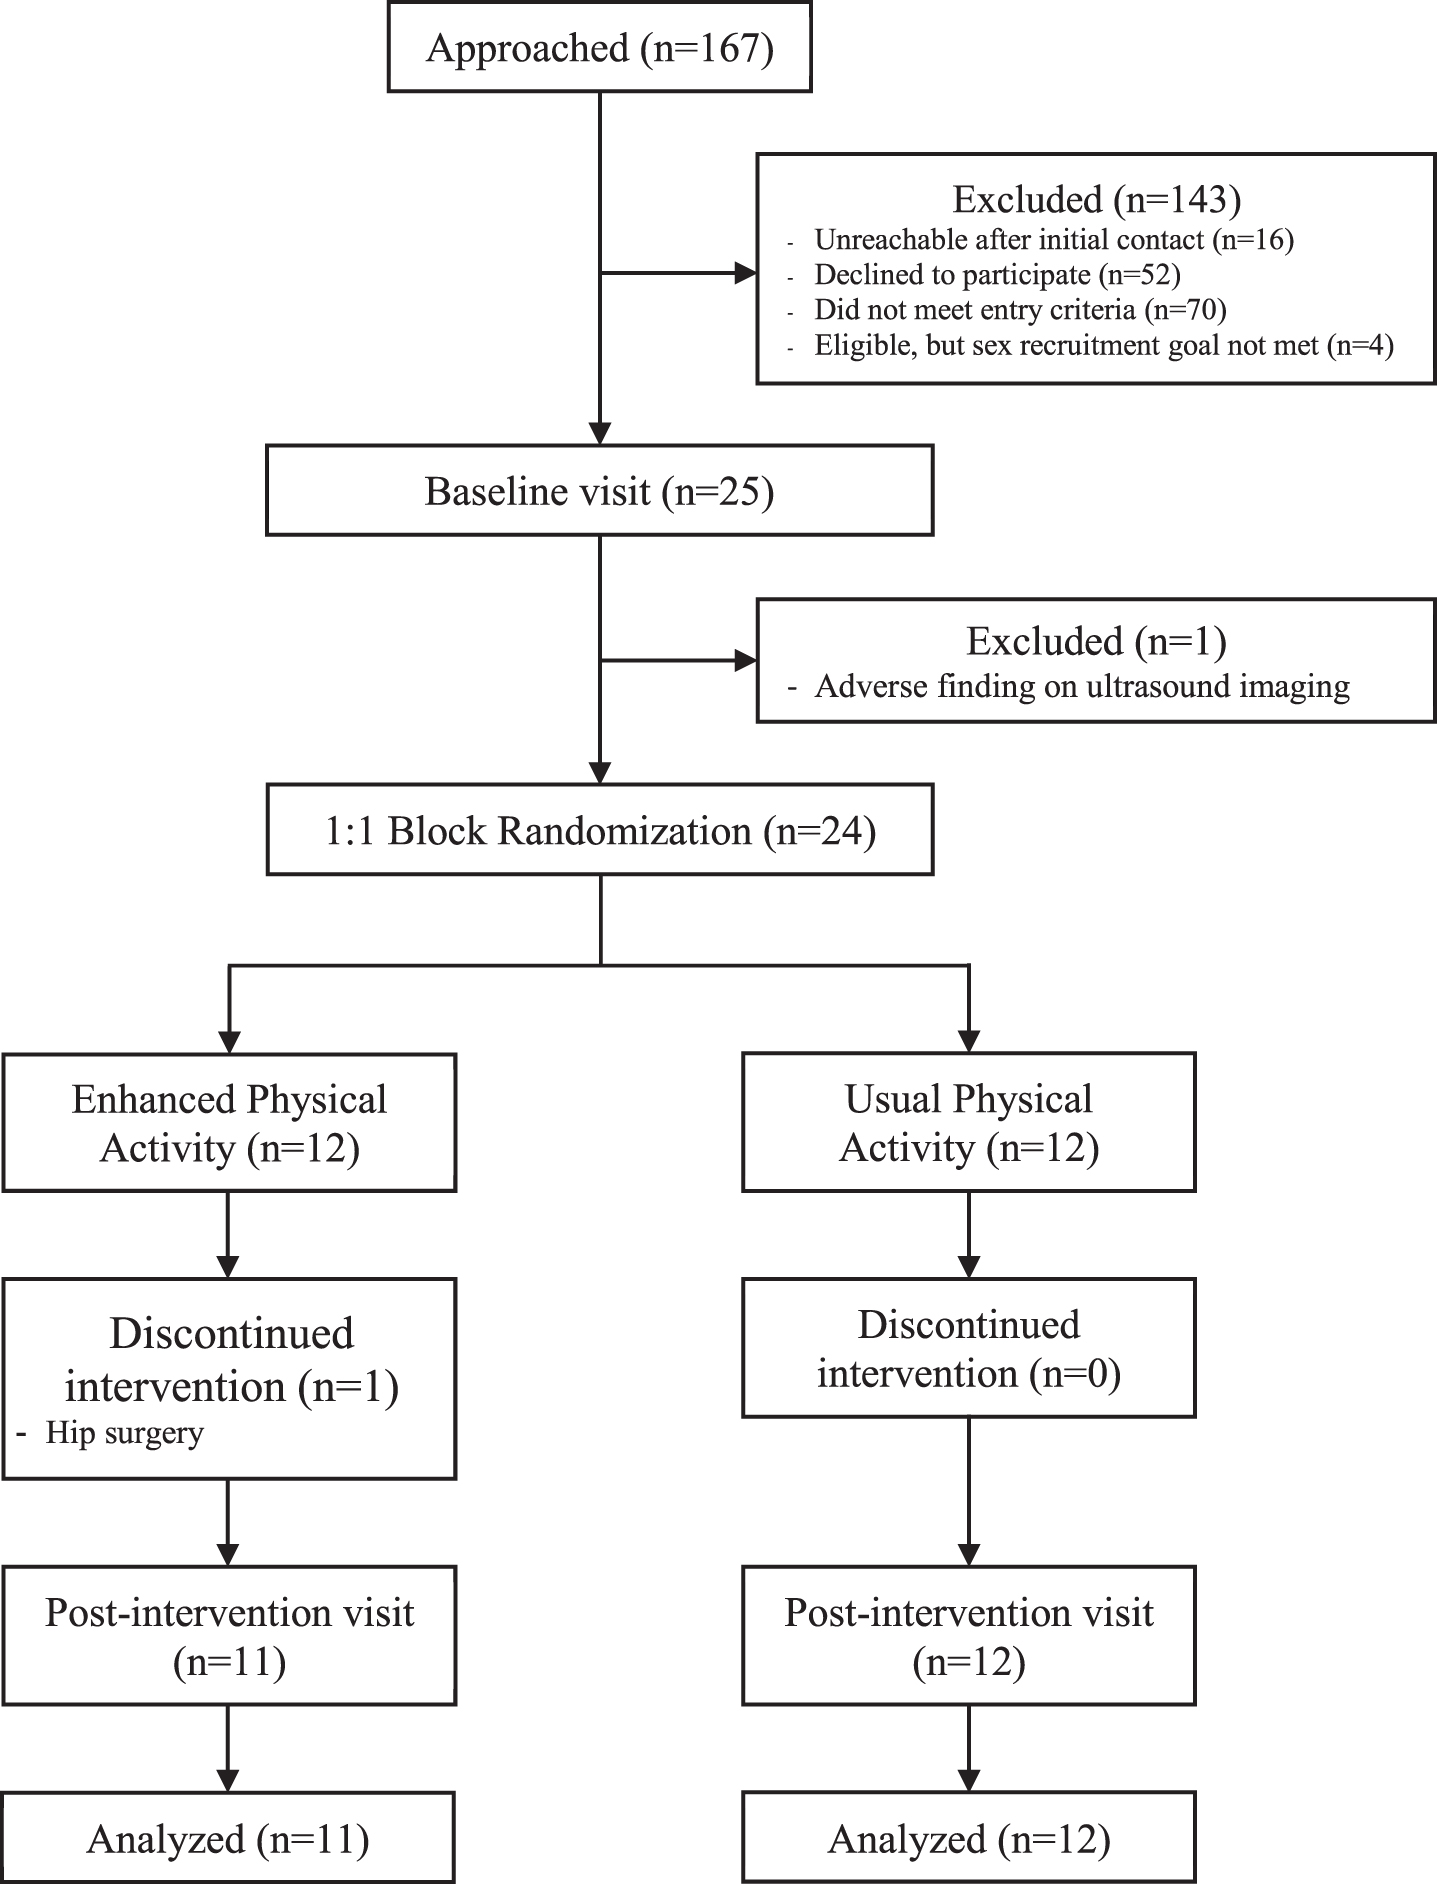 Flowchart of study design and recruitment. The final sample of participants whose data is to be analyzed was obtained after a thorough screening process; one participant had to discontinue the intervention after randomization.